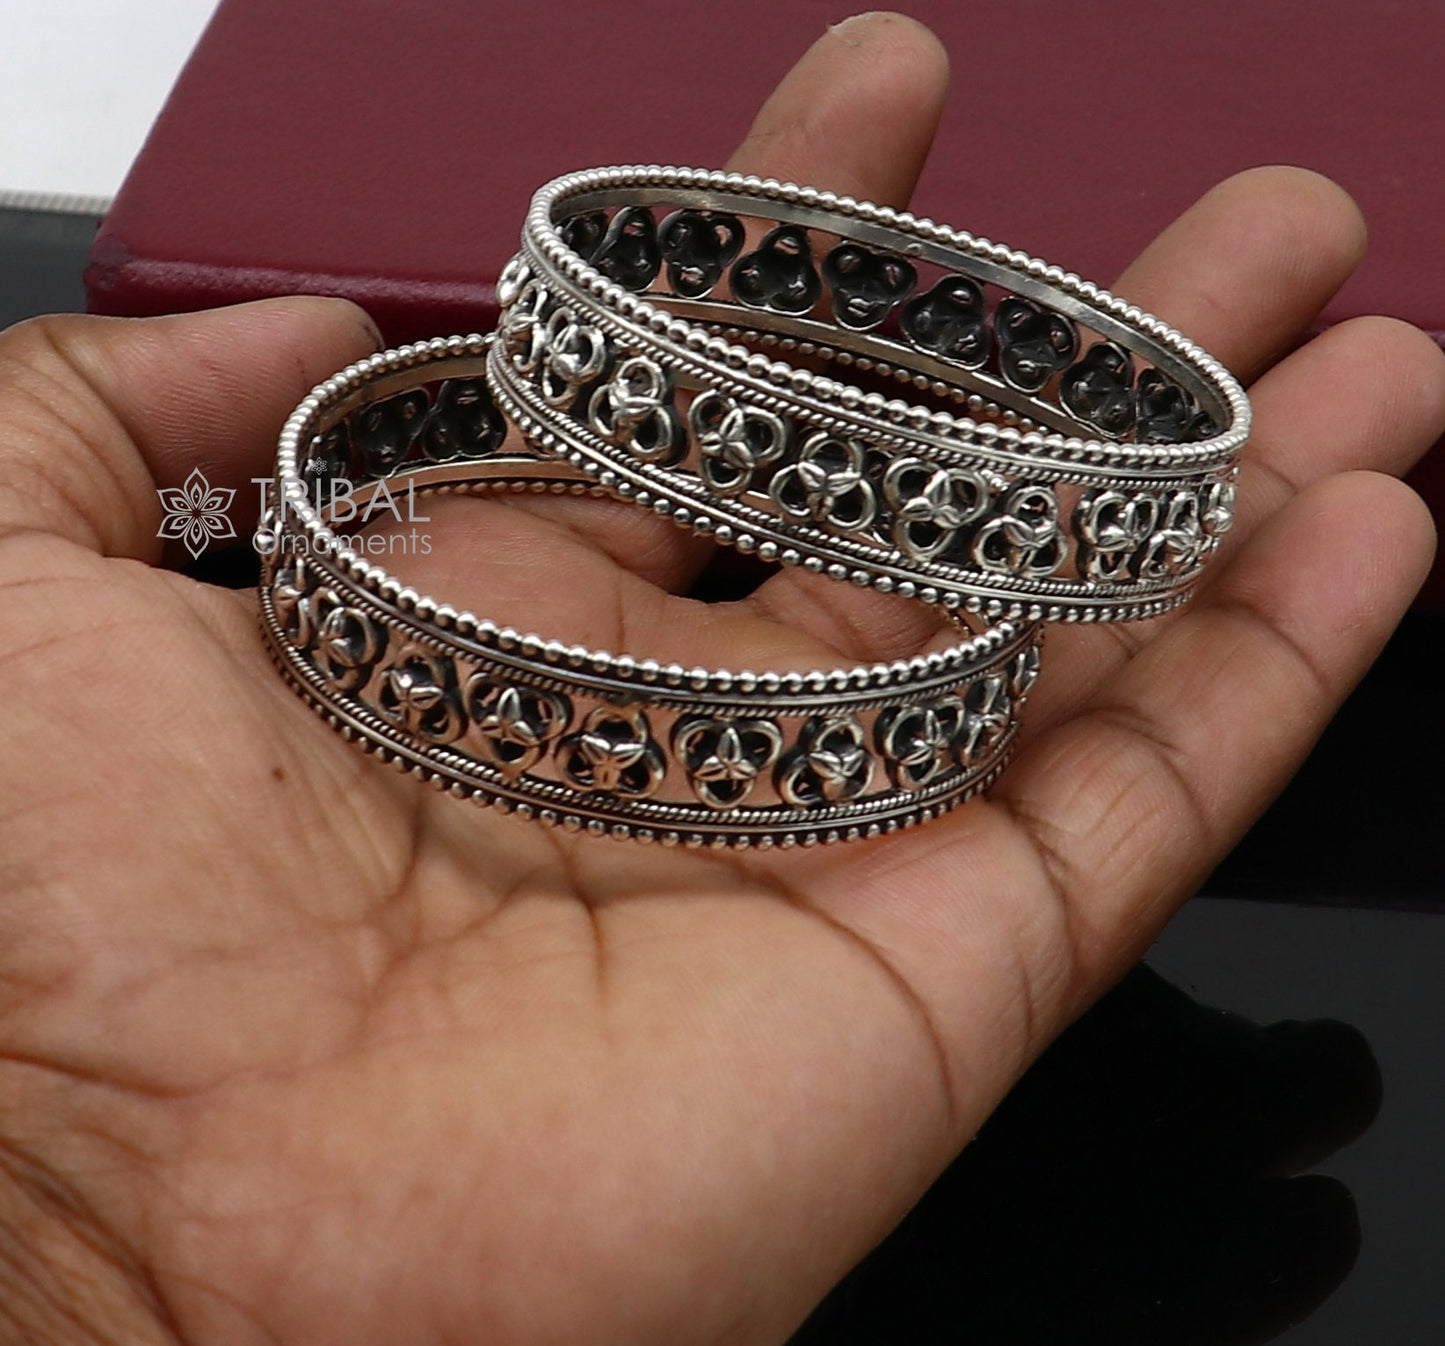 Trendy cultural design 925 sterling silver unique style handmade bangle bracelet , best brides collection wedding NAVRATRI jewelry nba401 - TRIBAL ORNAMENTS